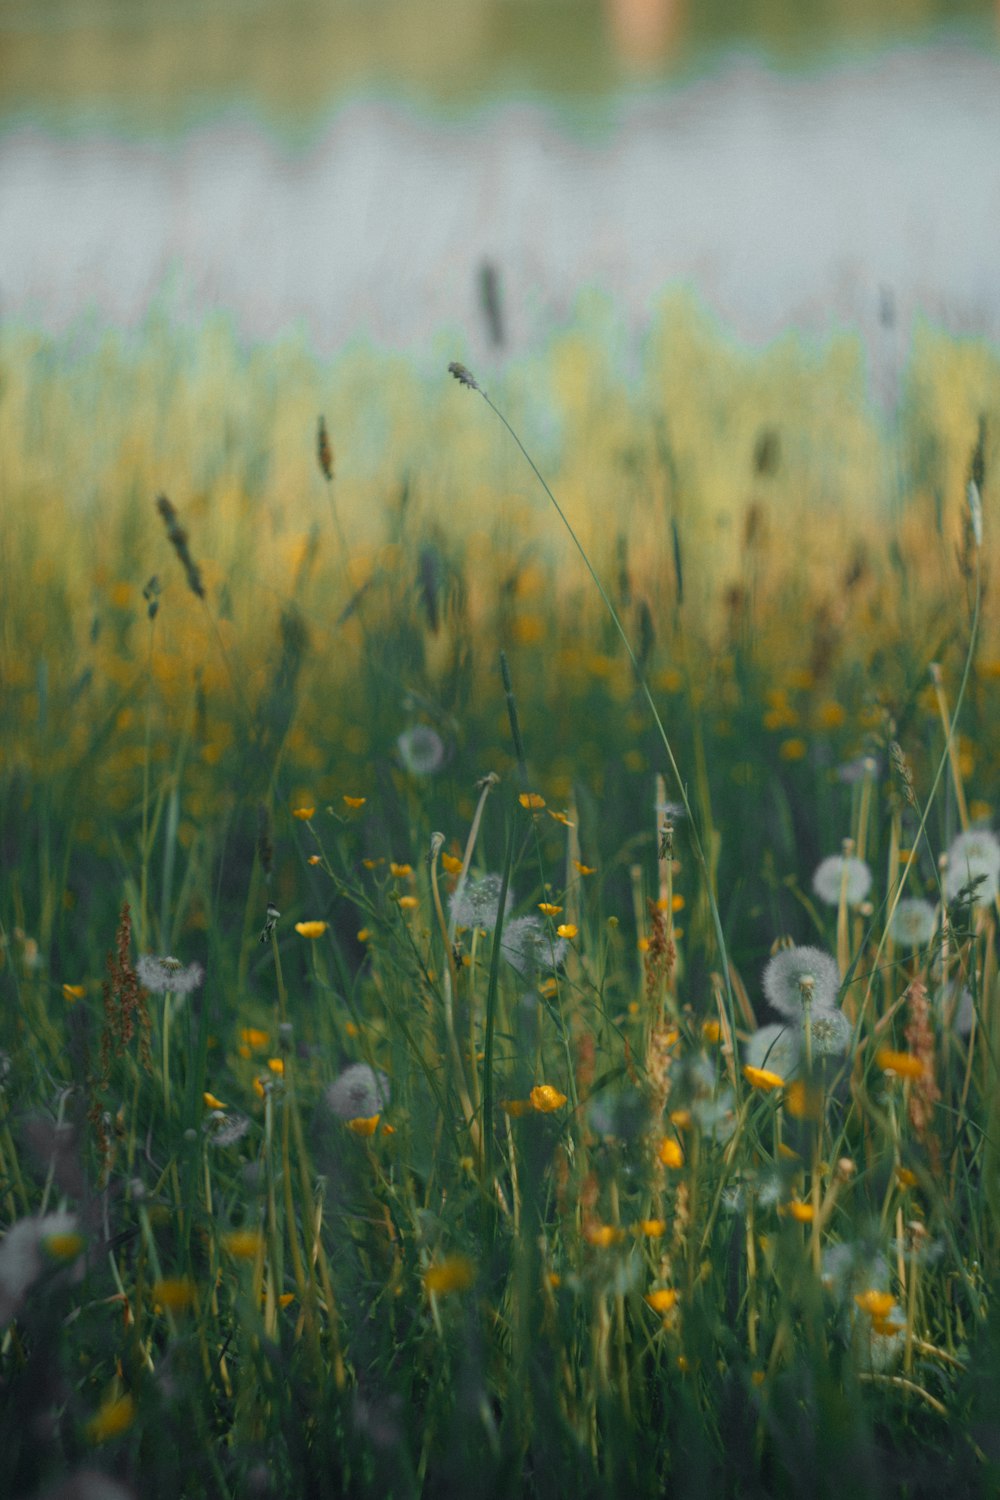 a field full of flowers and grass next to a body of water